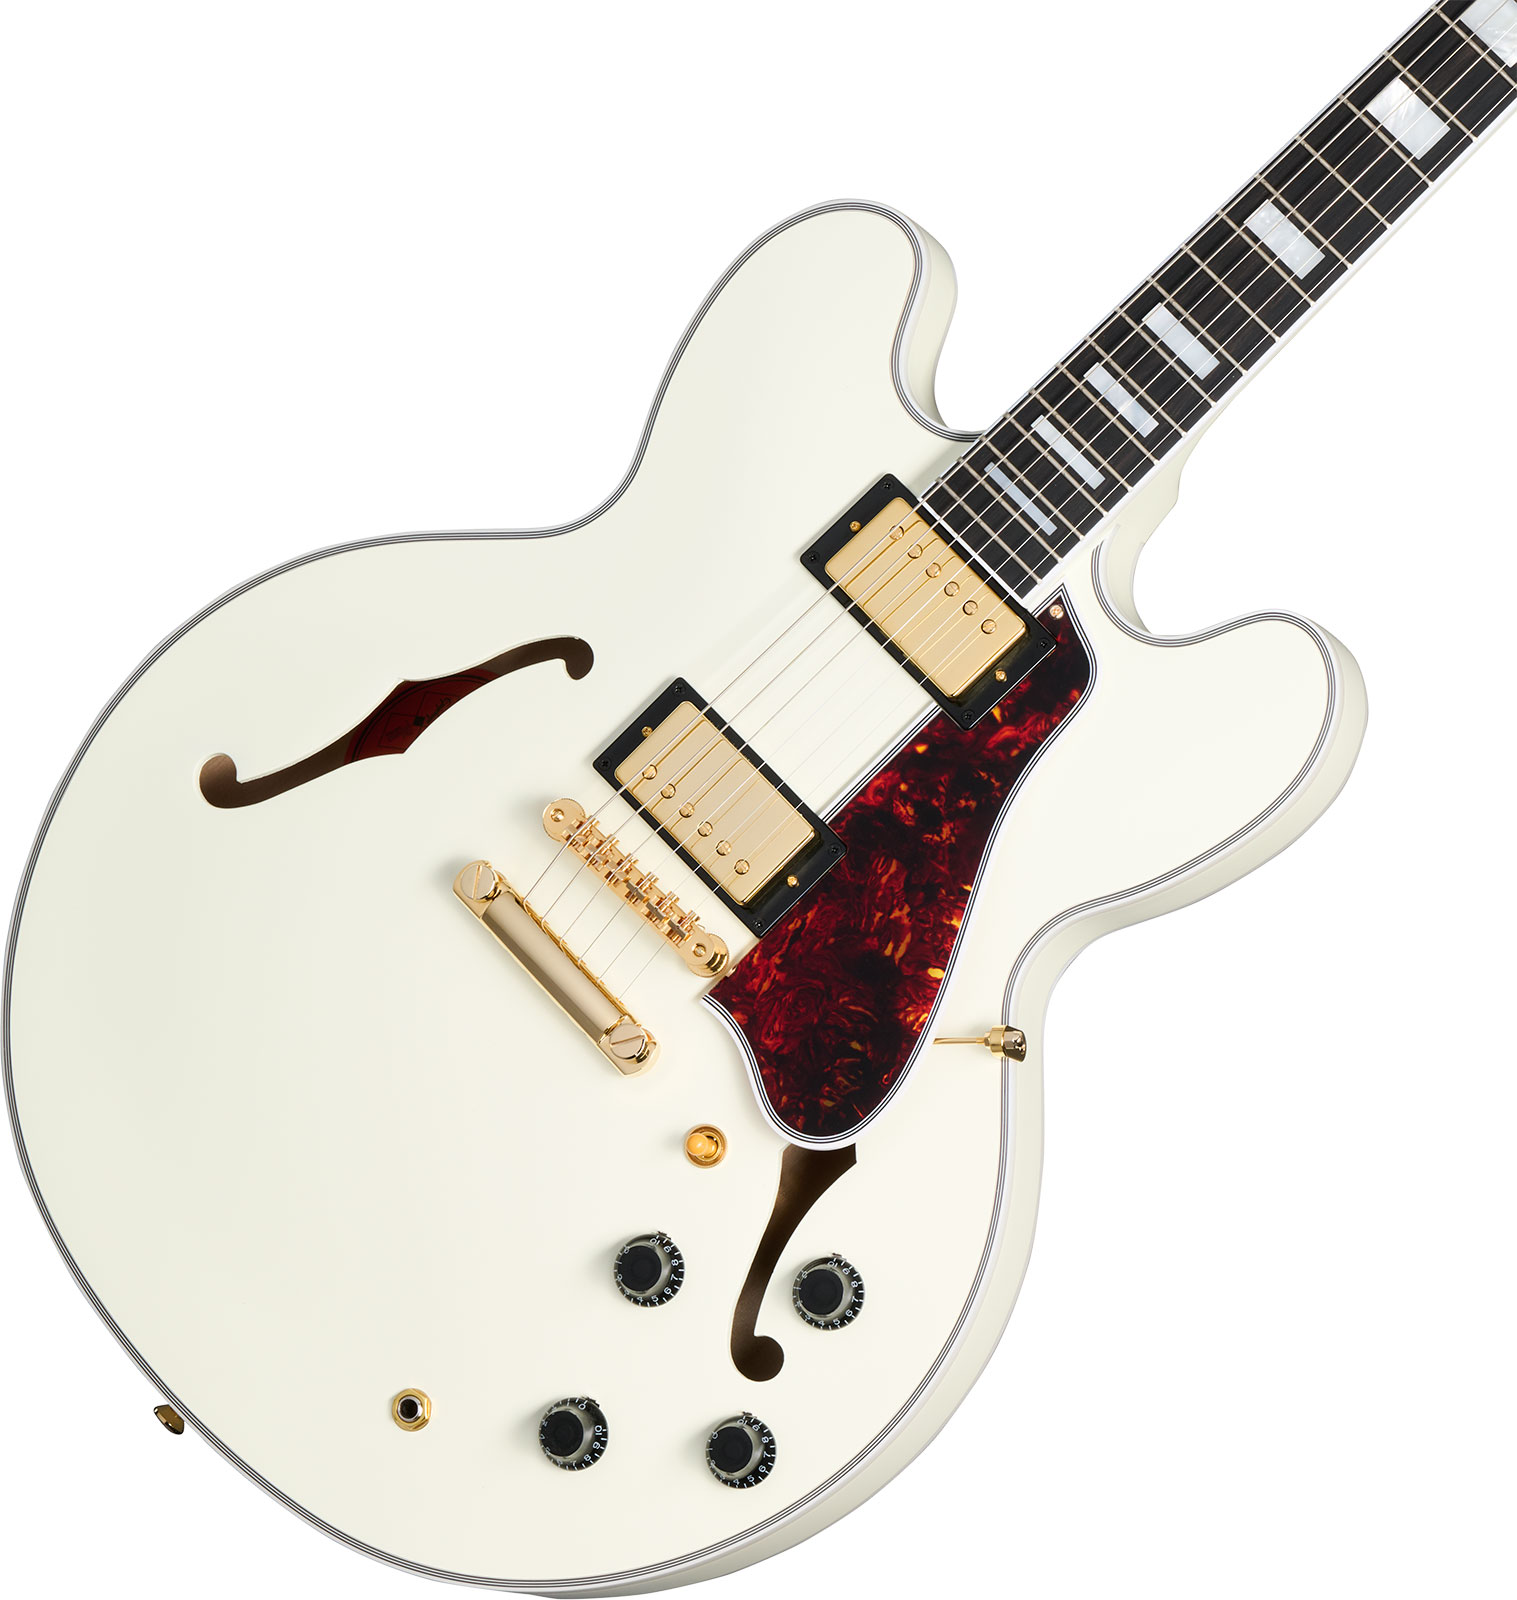 Epiphone Es355 1959 Inspired By 2h Gibson Ht Eb - Vos Classic White - Semi hollow elektriche gitaar - Variation 3